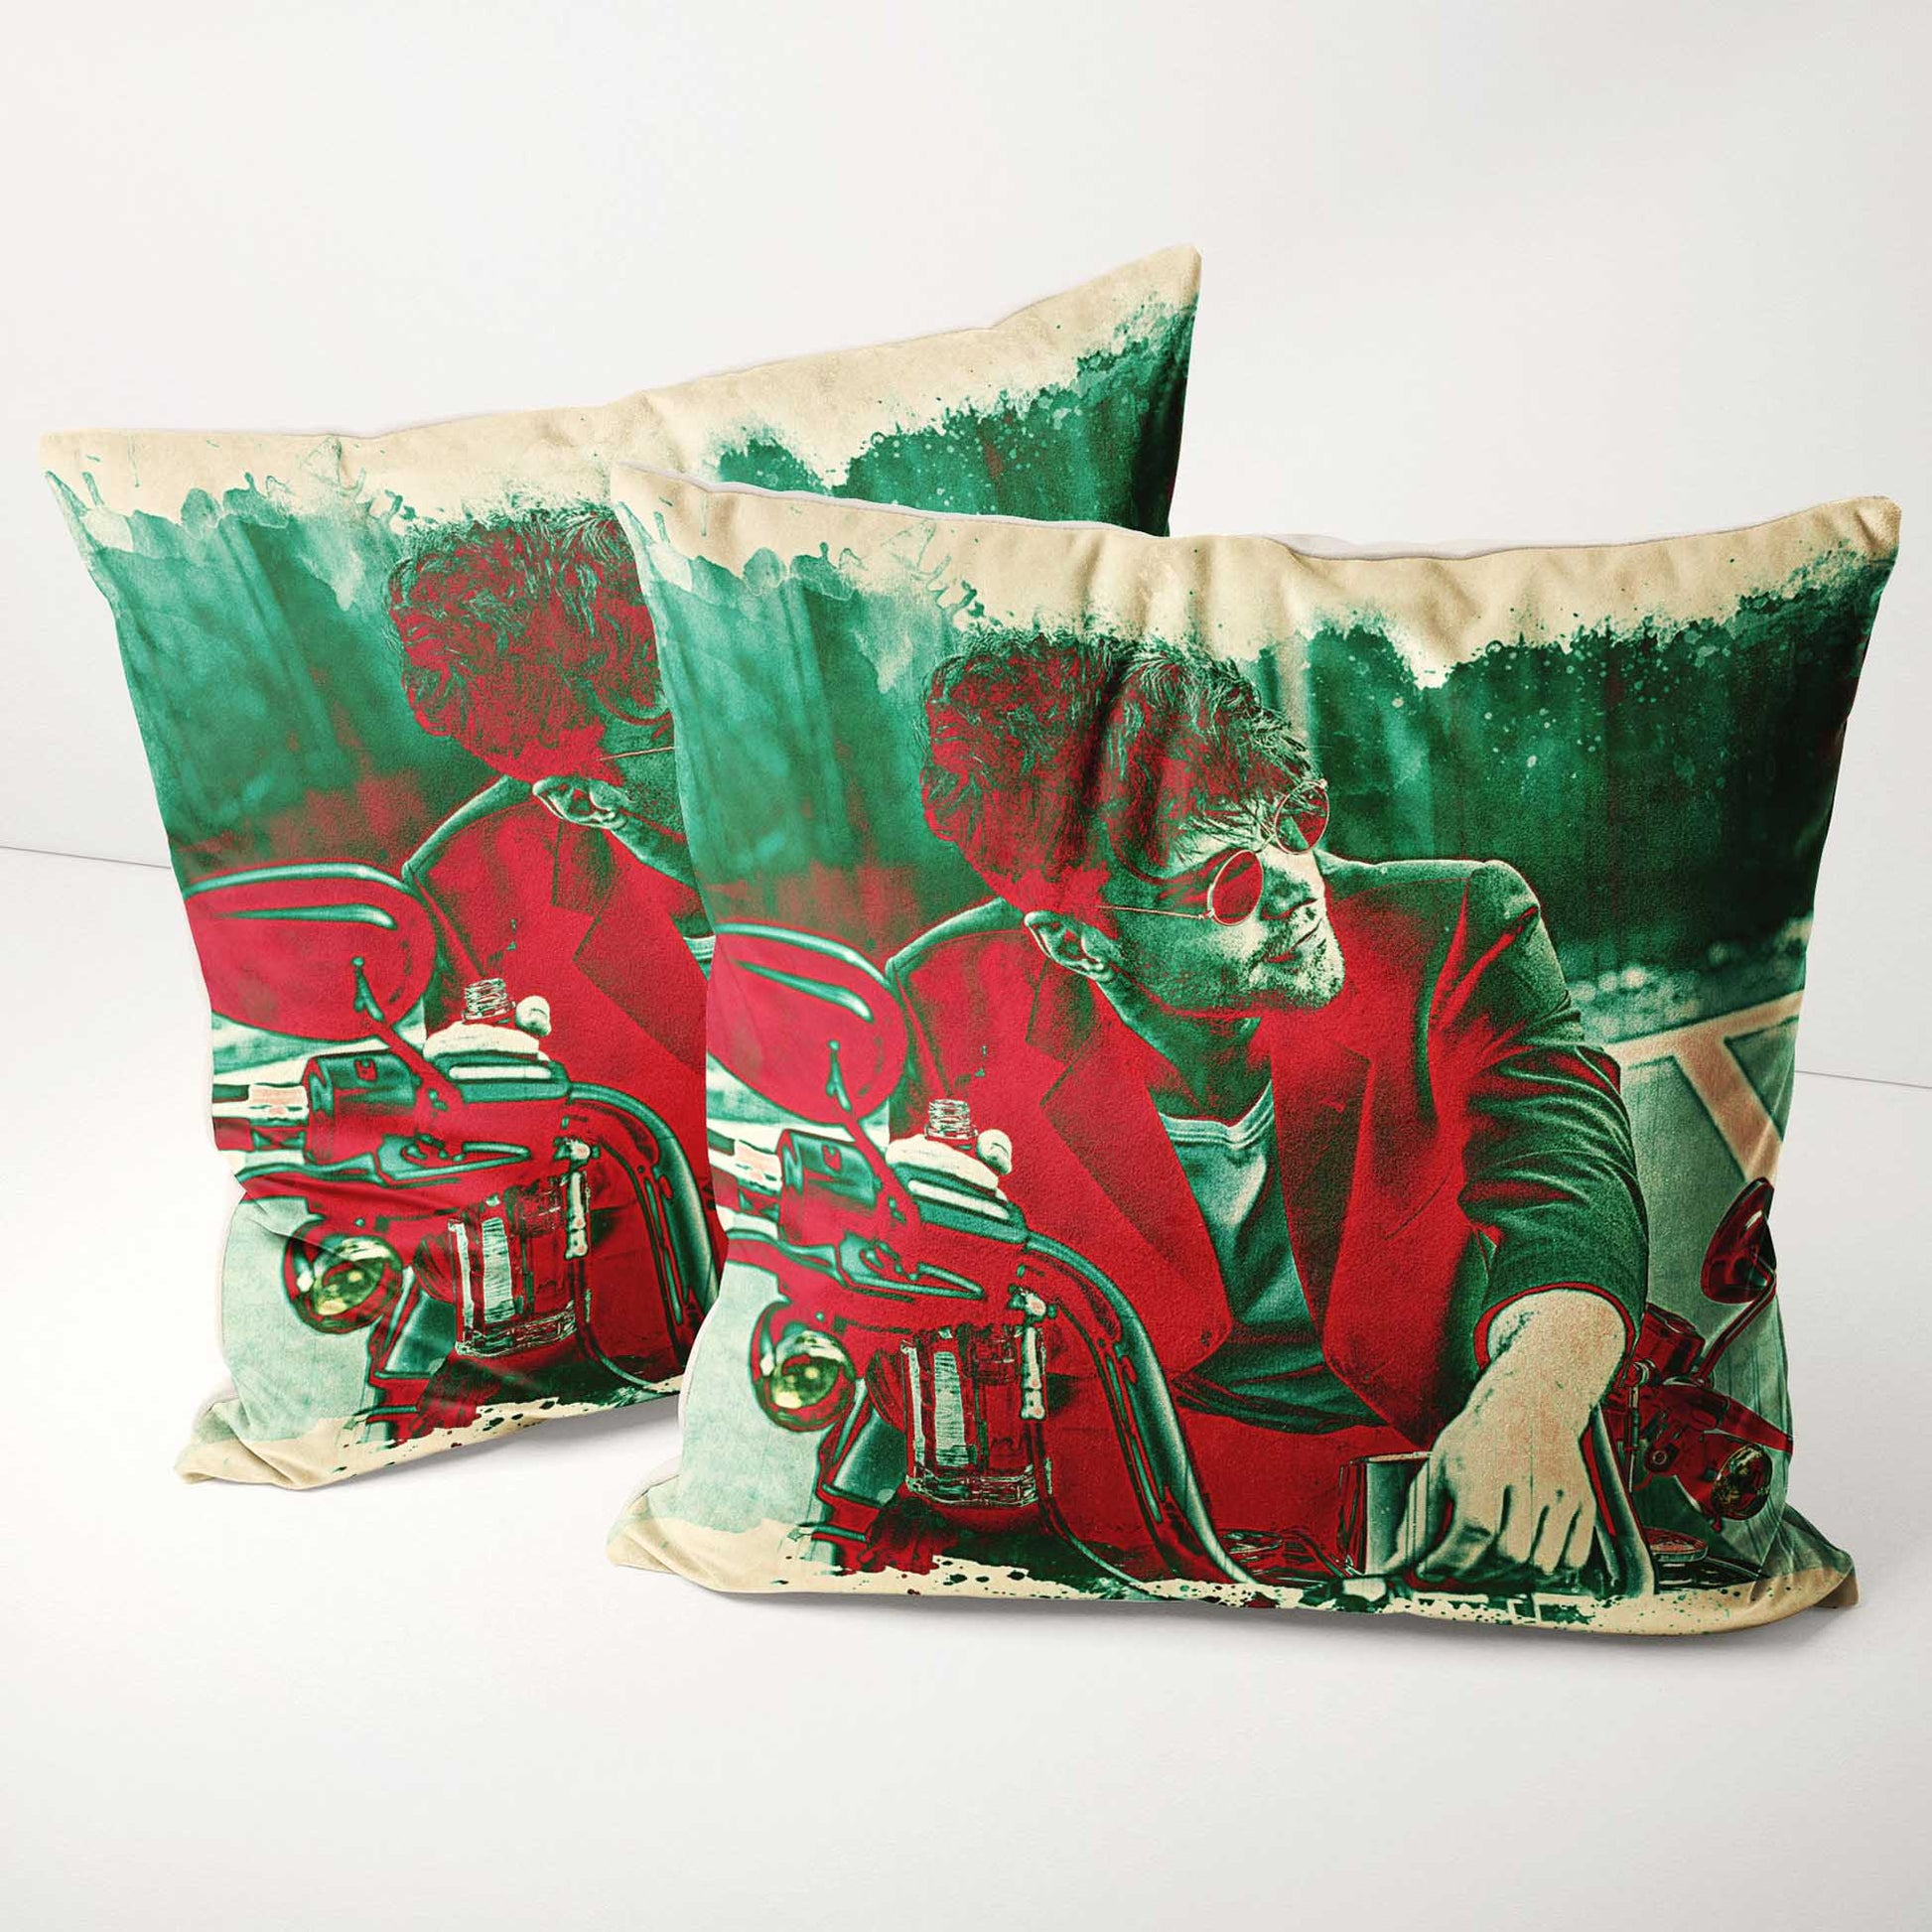 Infuse your space with the freshness of the Personalised Green & Red Cushion. Its vibrant and vivid colors create a sharp and eye-catching display, while the velvet fabric adds a luxurious touch. Handmade with care, bespoke cushion